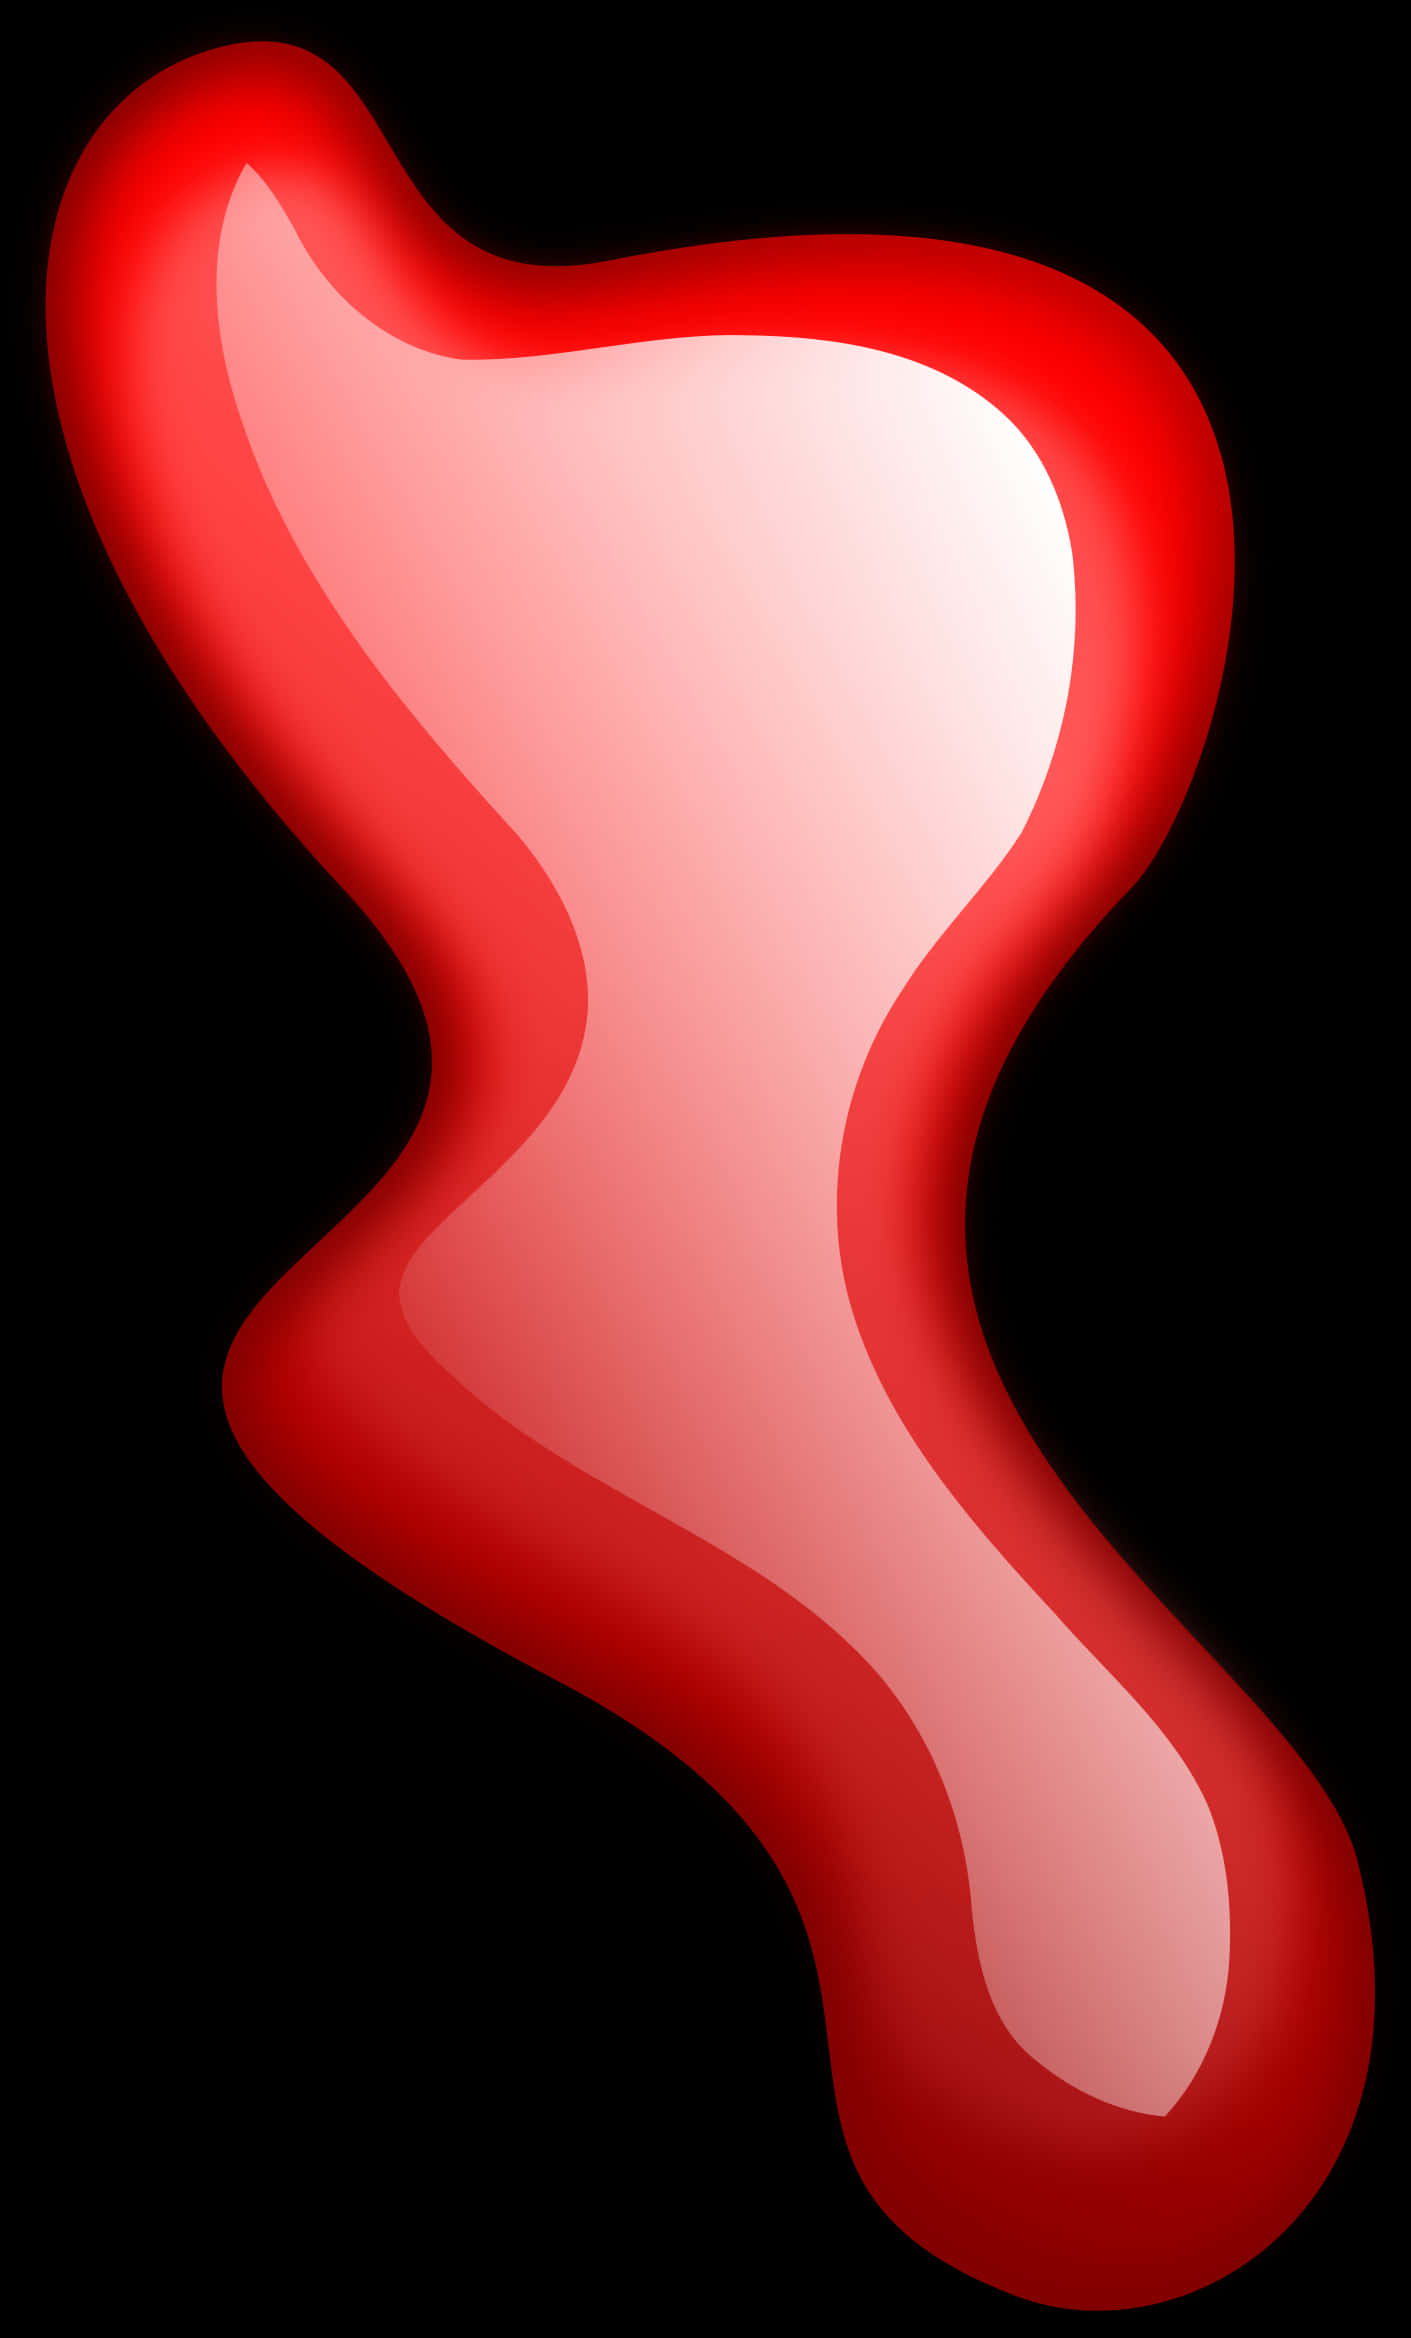 A Red And White Liquid